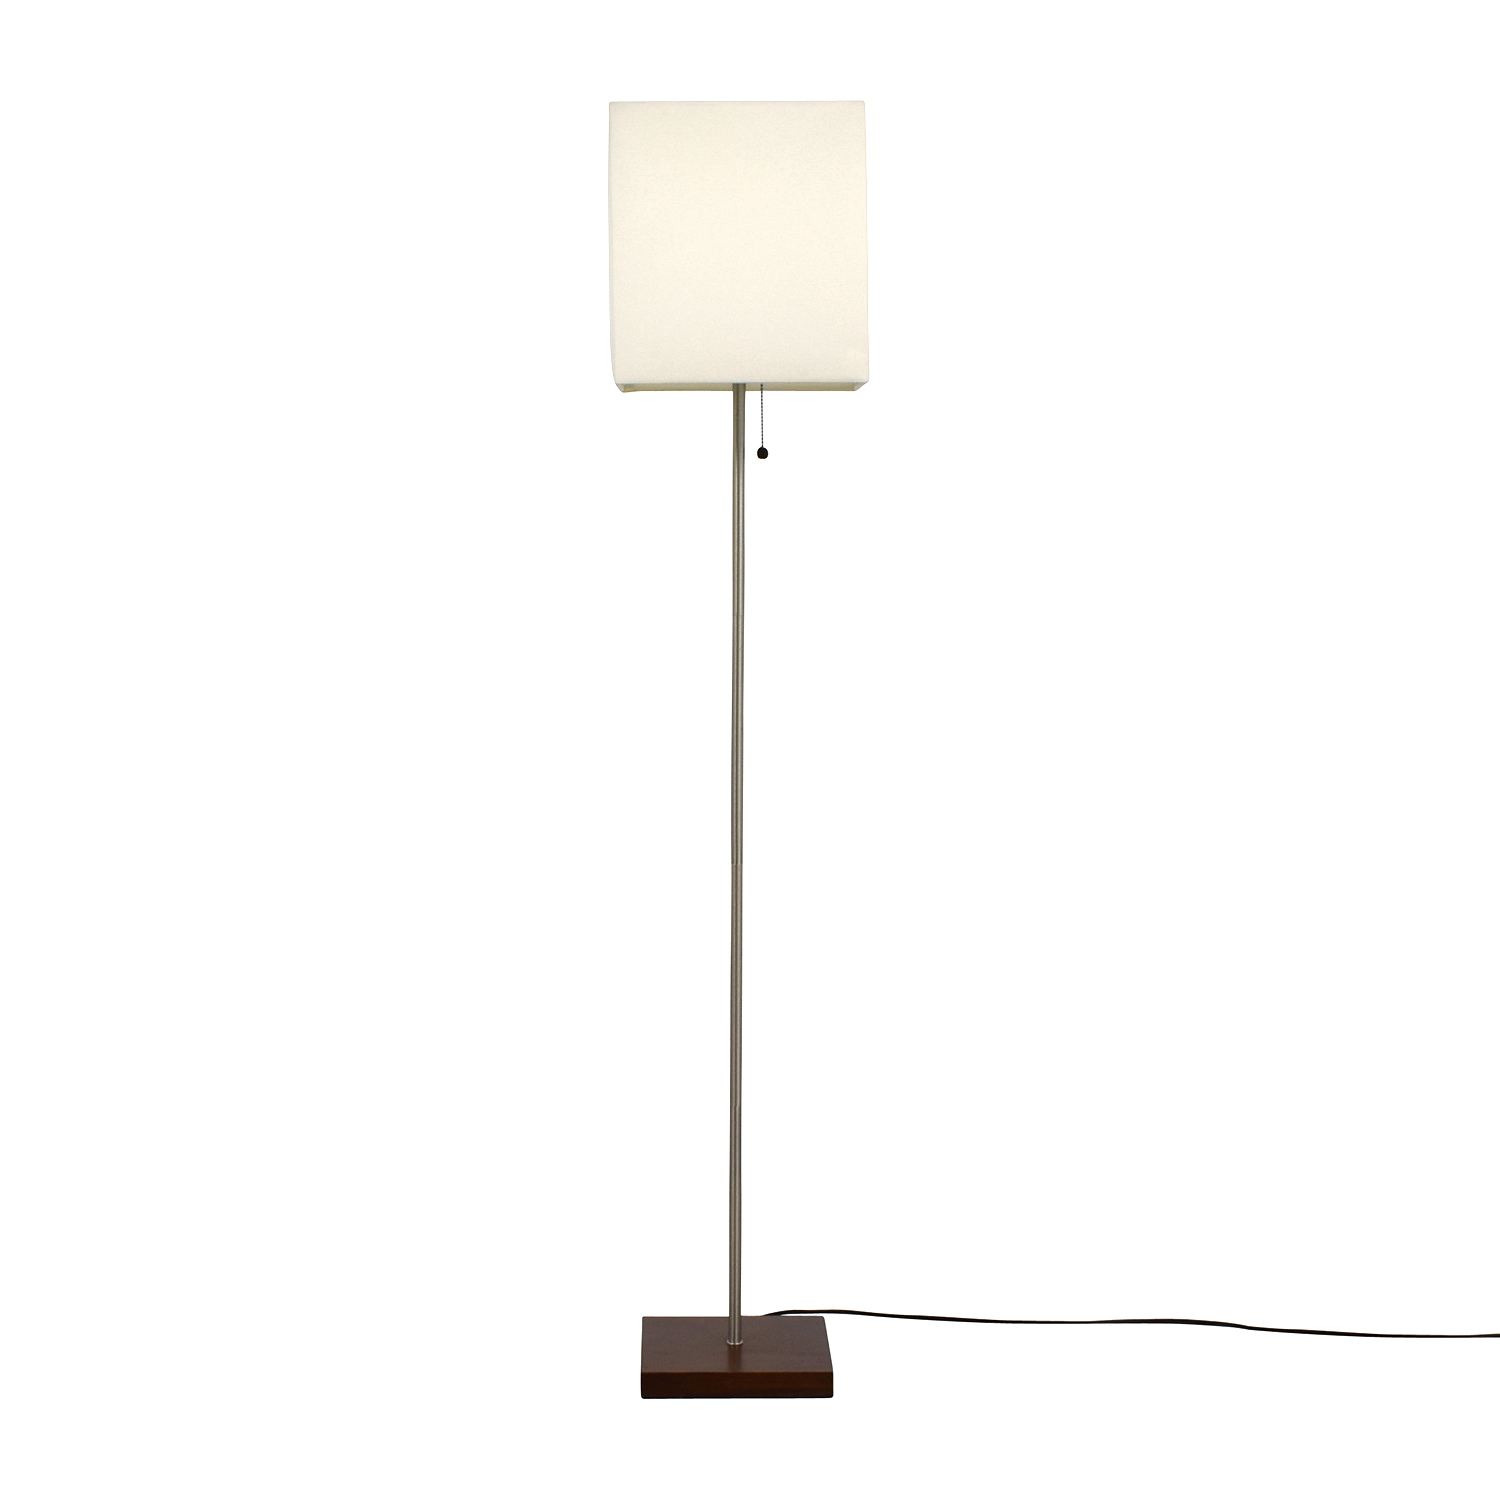 25 Off Target Target Classic Silver Floor Lamp Decor pertaining to measurements 1500 X 1500